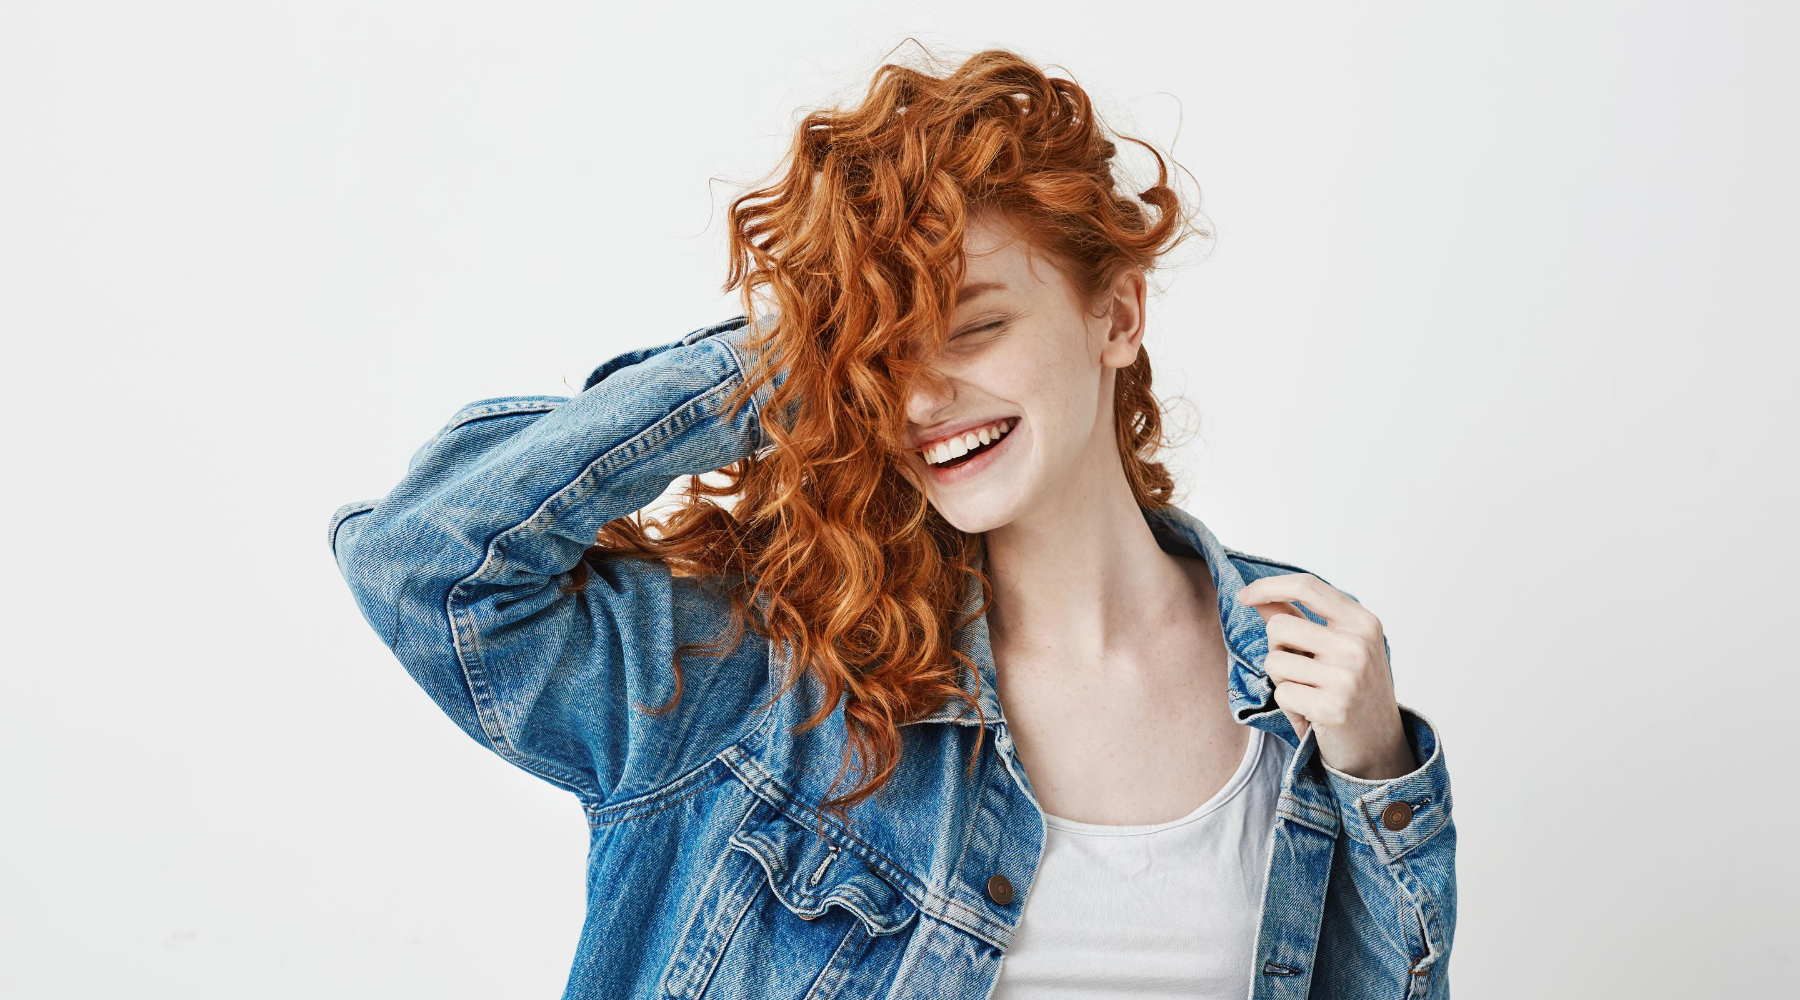 From hair growth vitamins to the best hair products and treatments, our blog offers 10 essential beauty tips to keep your healthy hair looking its best.